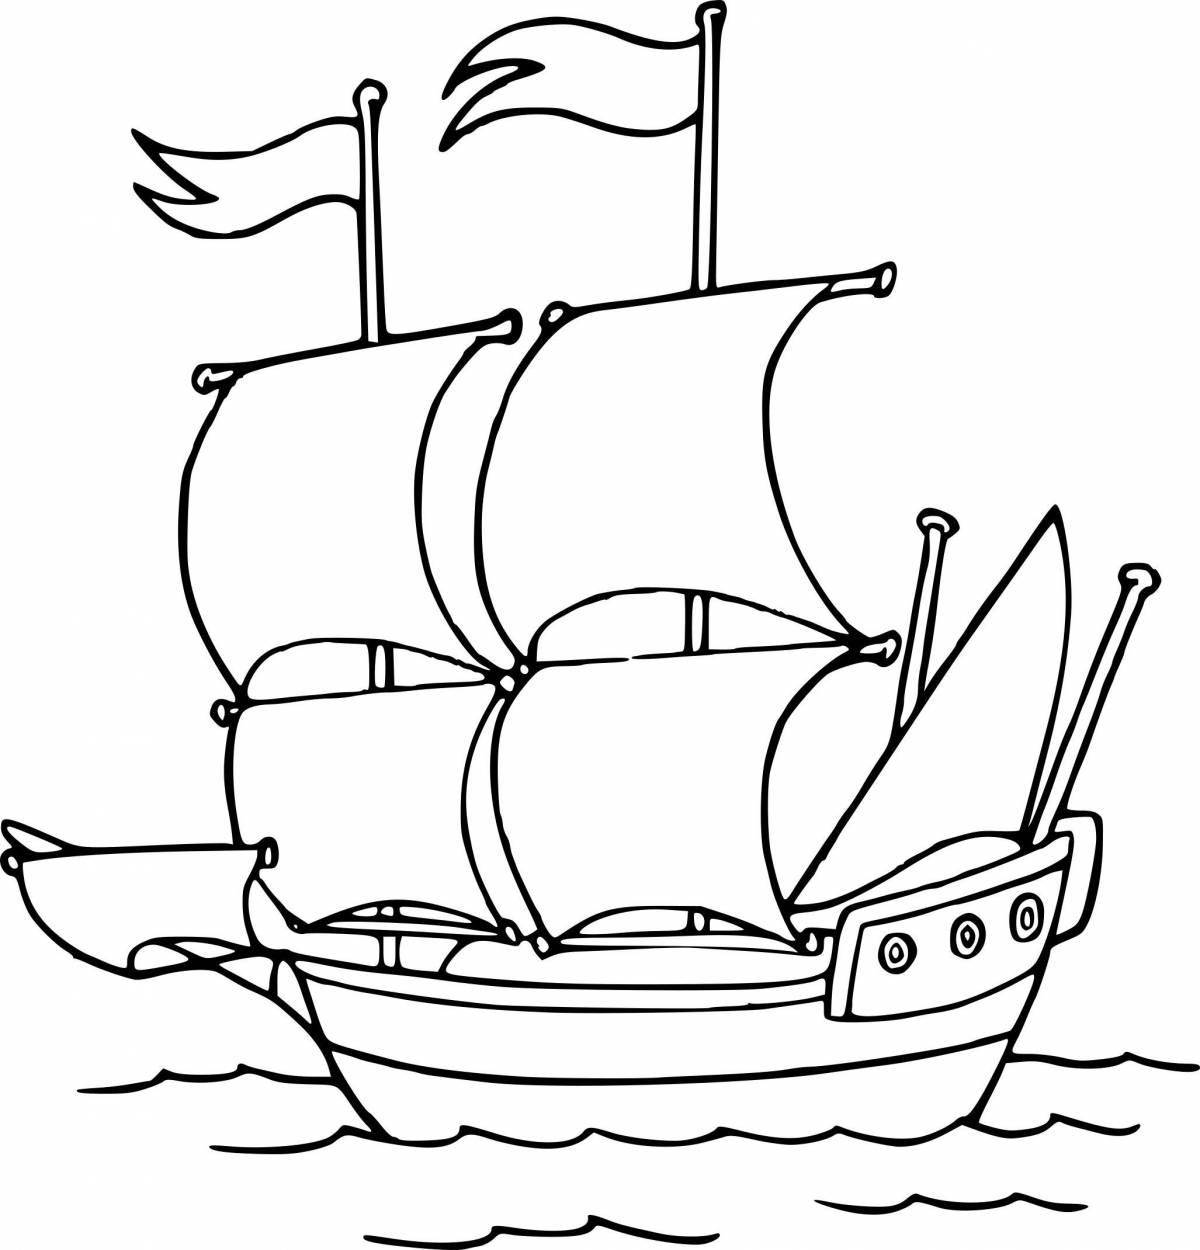 Colorful boat coloring page for 6-7 year olds